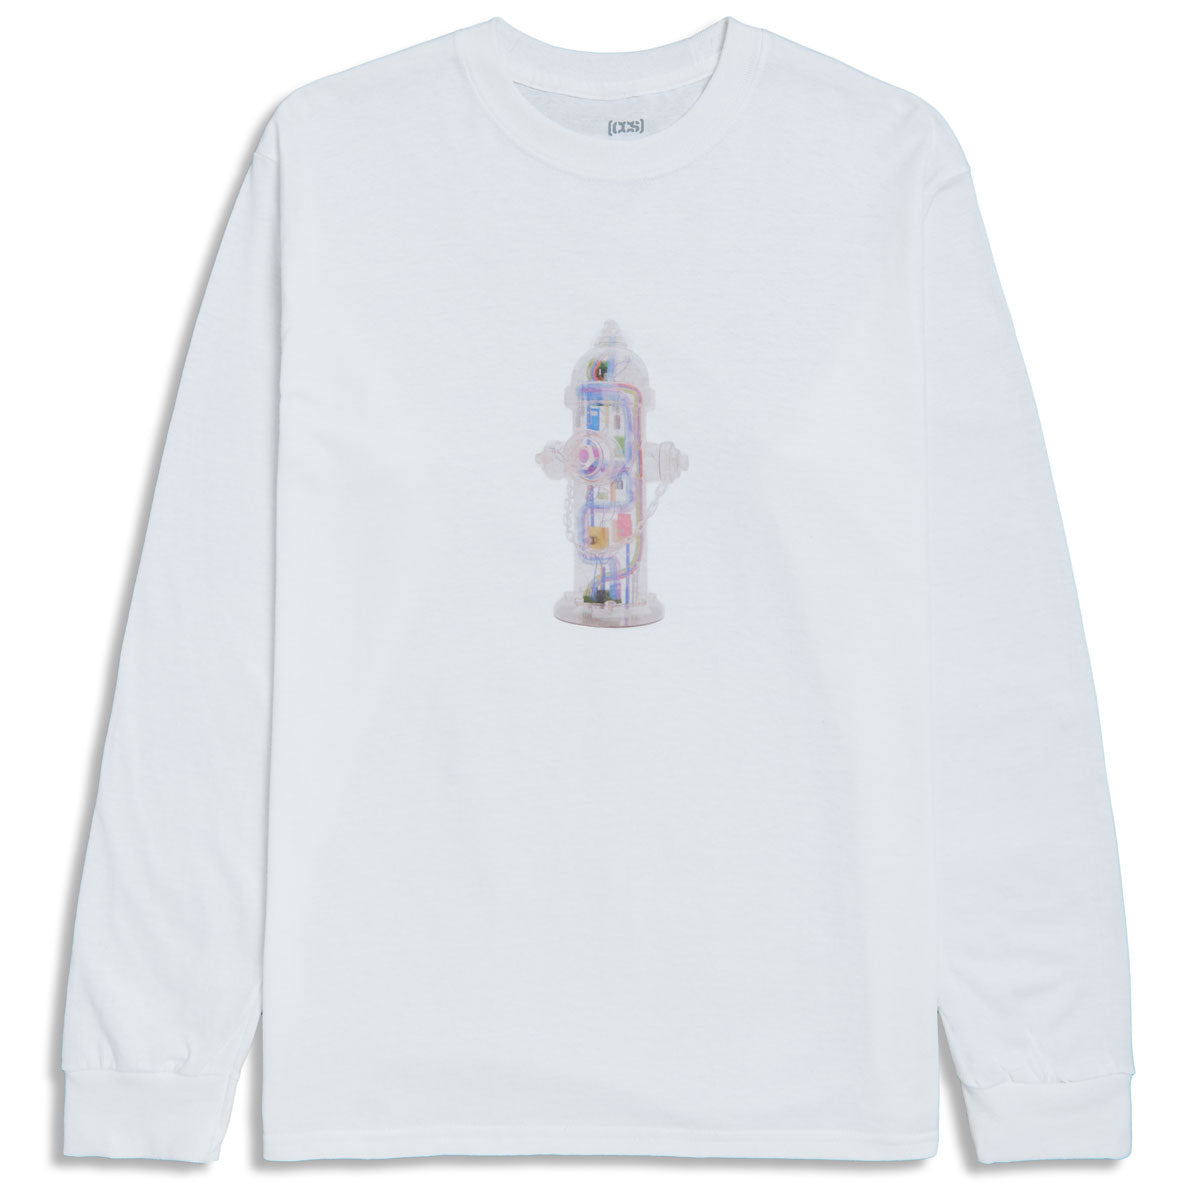 CCS Going Clear Hydrant Long Sleeve T-Shirt - White - SM image 1